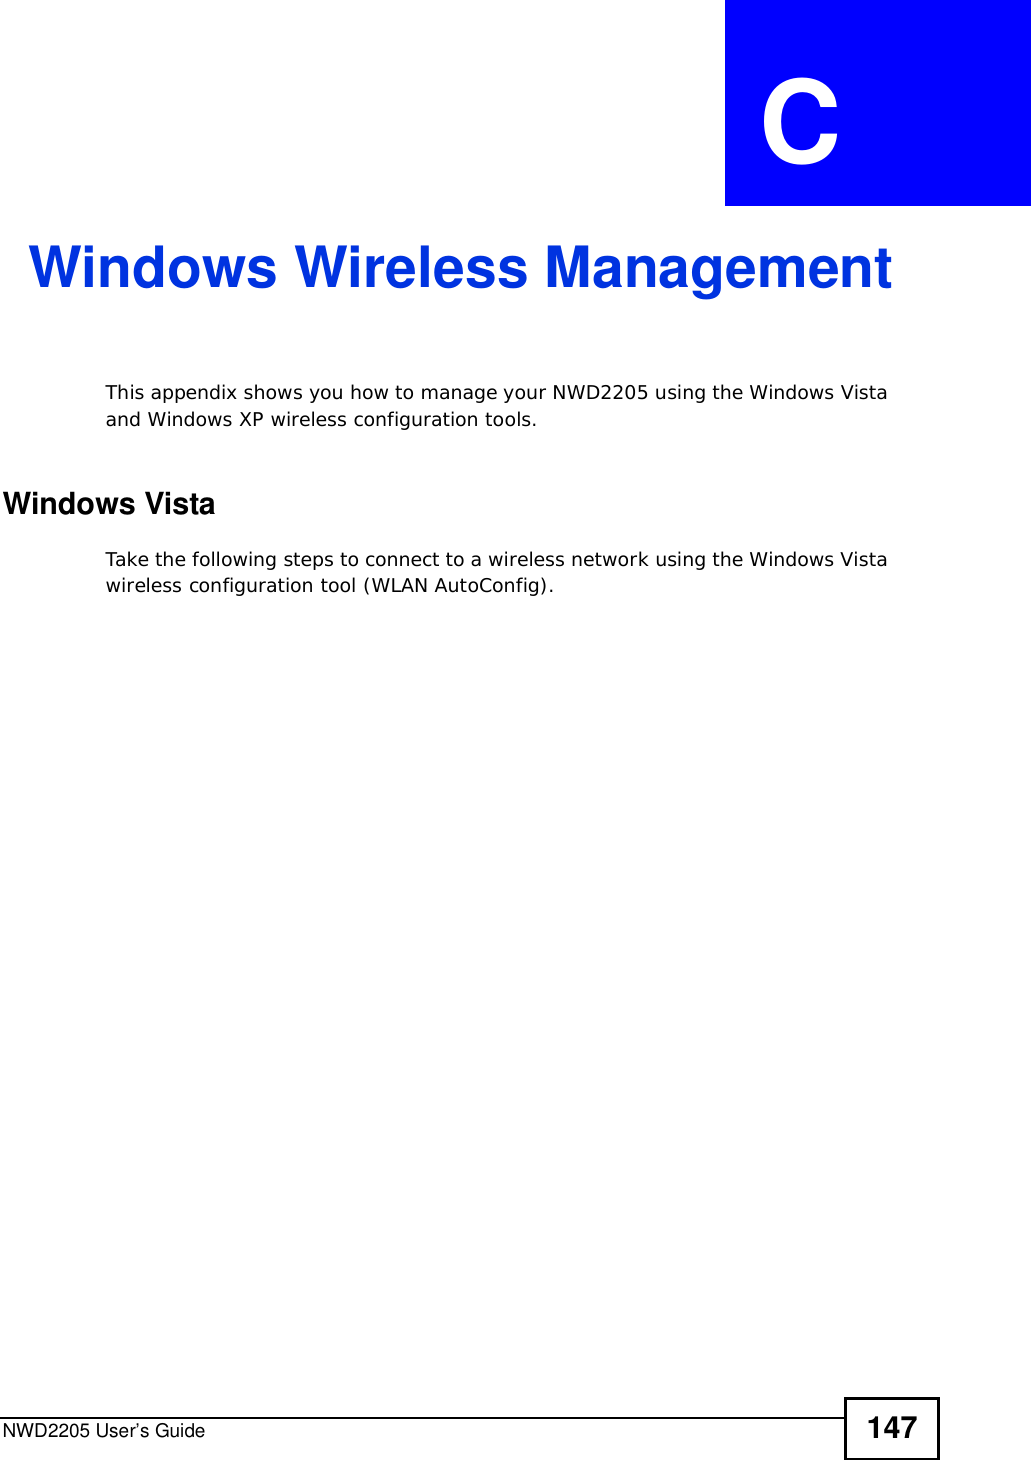 NWD2205 User’s Guide 147APPENDIX  C Windows Wireless ManagementThis appendix shows you how to manage your NWD2205 using the Windows Vista and Windows XP wireless configuration tools.Windows VistaTake the following steps to connect to a wireless network using the Windows Vista wireless configuration tool (WLAN AutoConfig).